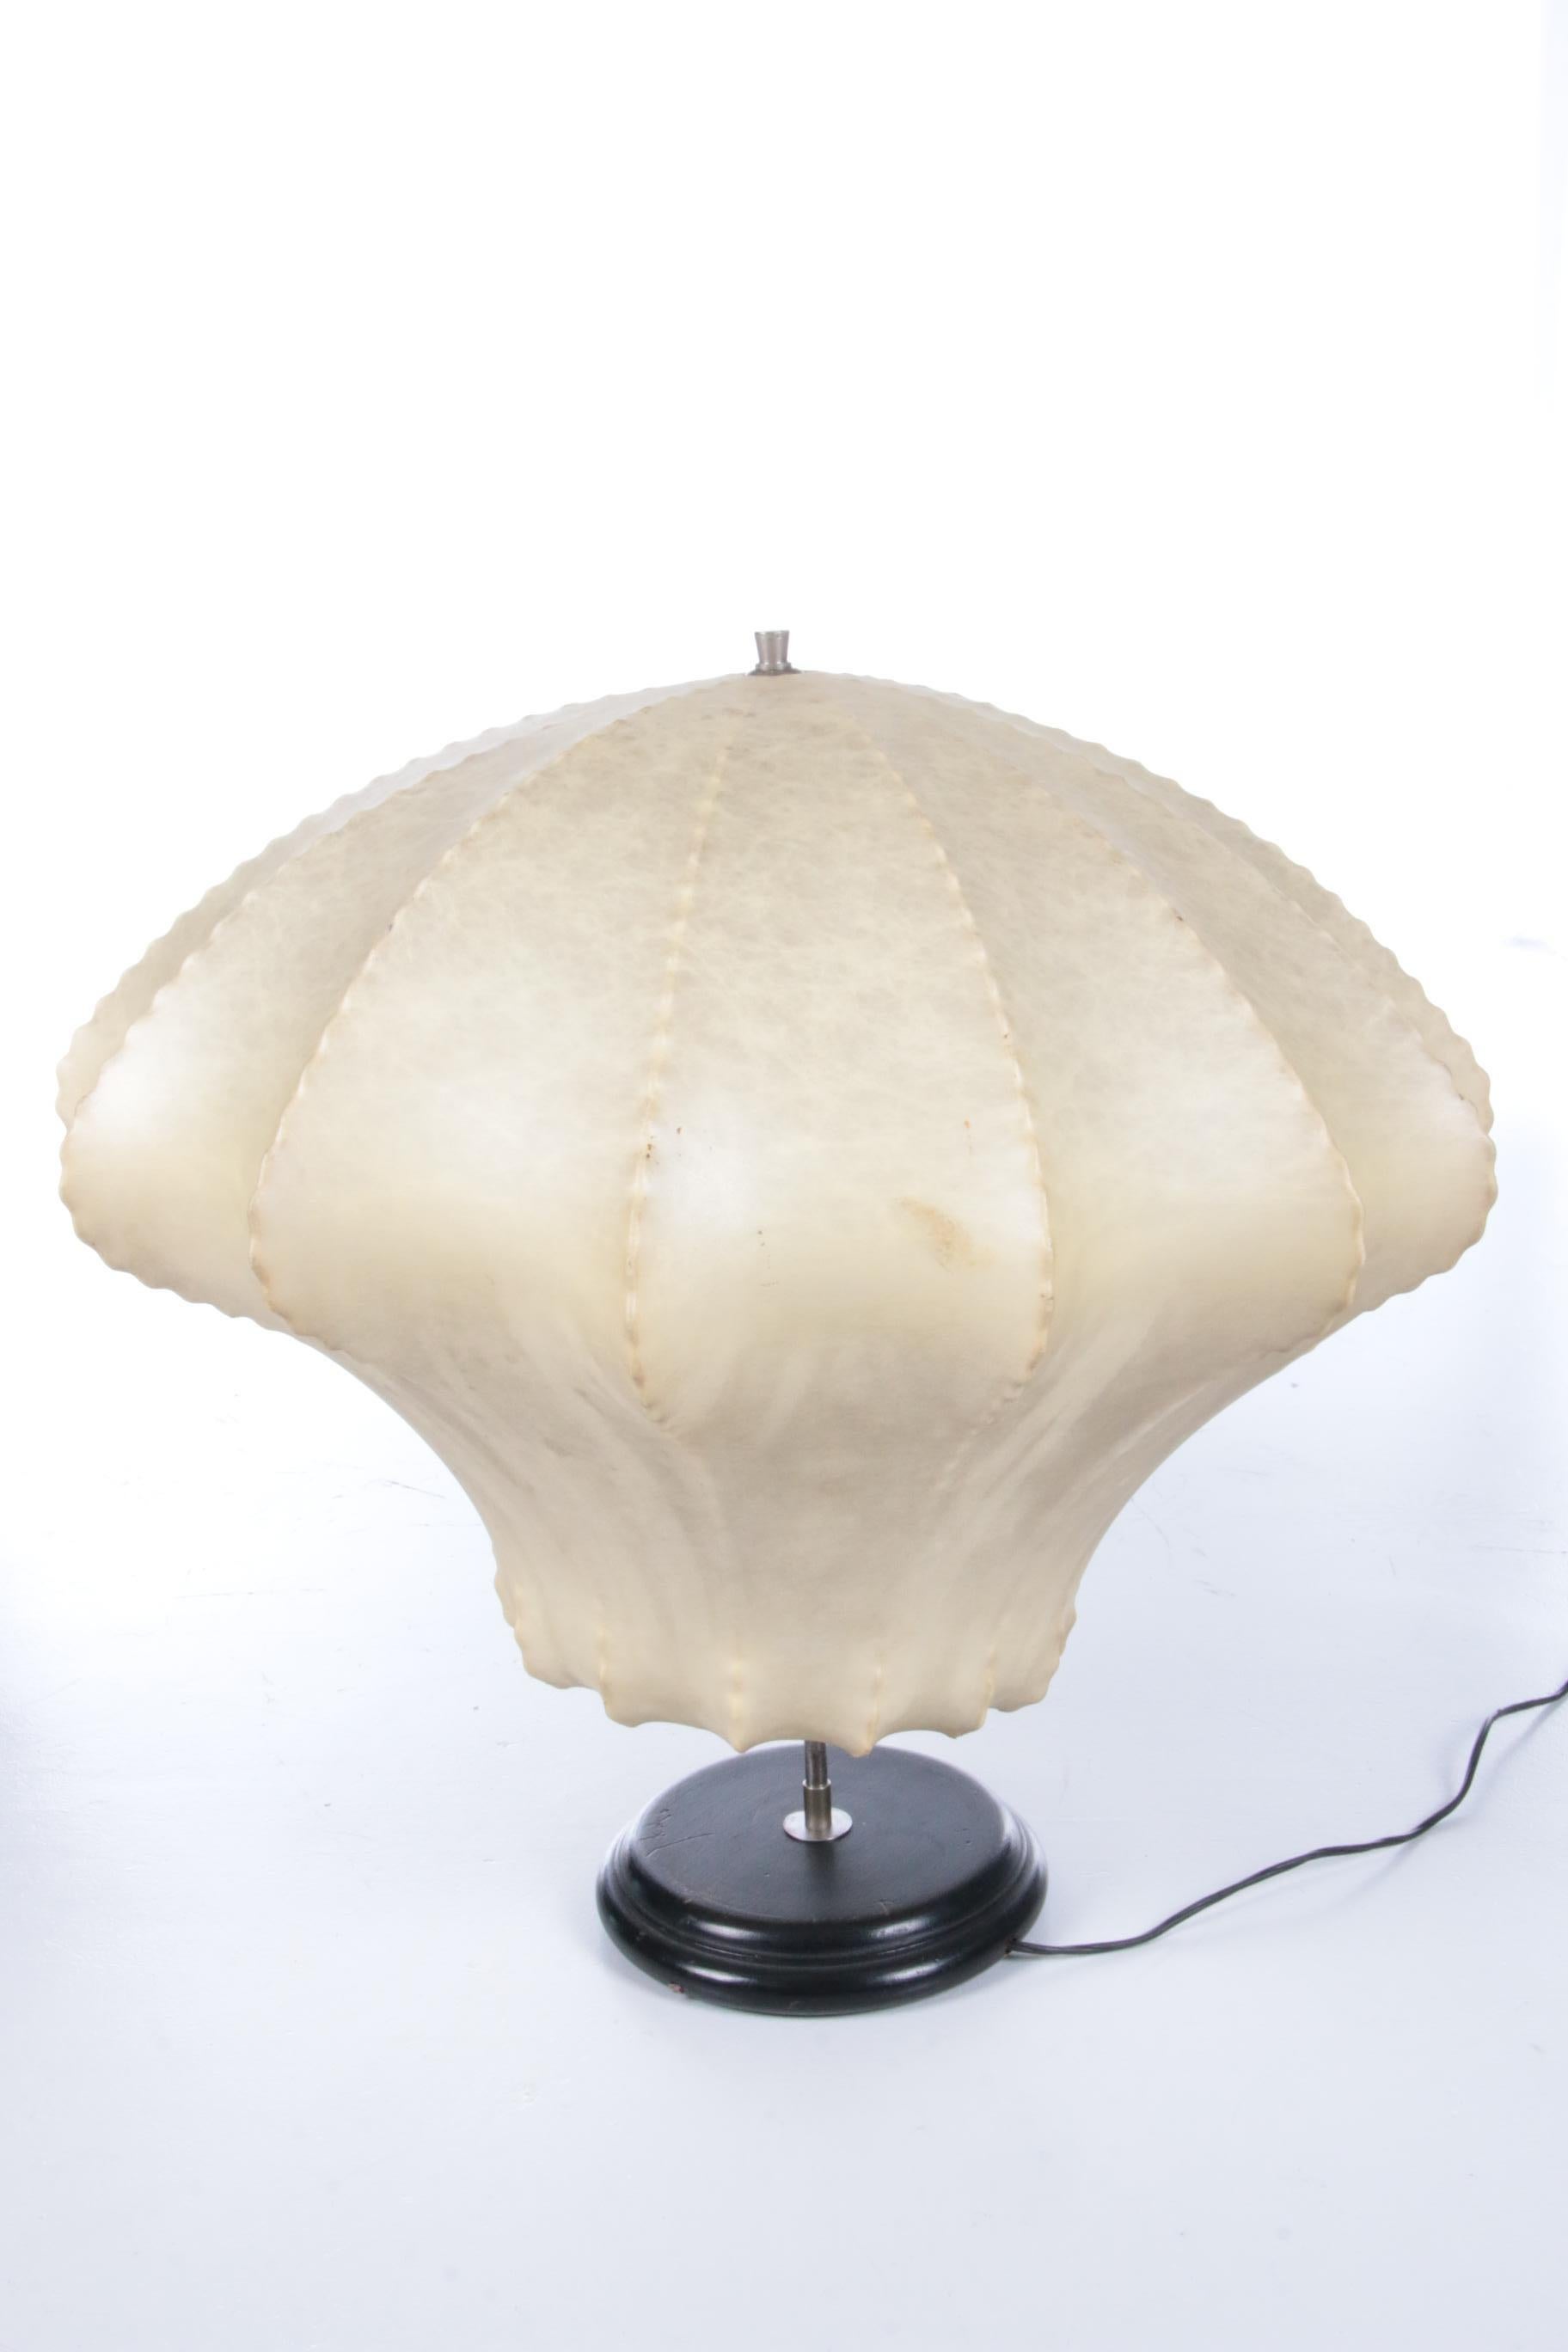 Italian Cocoon Table Lamp by Castiglioni for Flos 1960 Italy